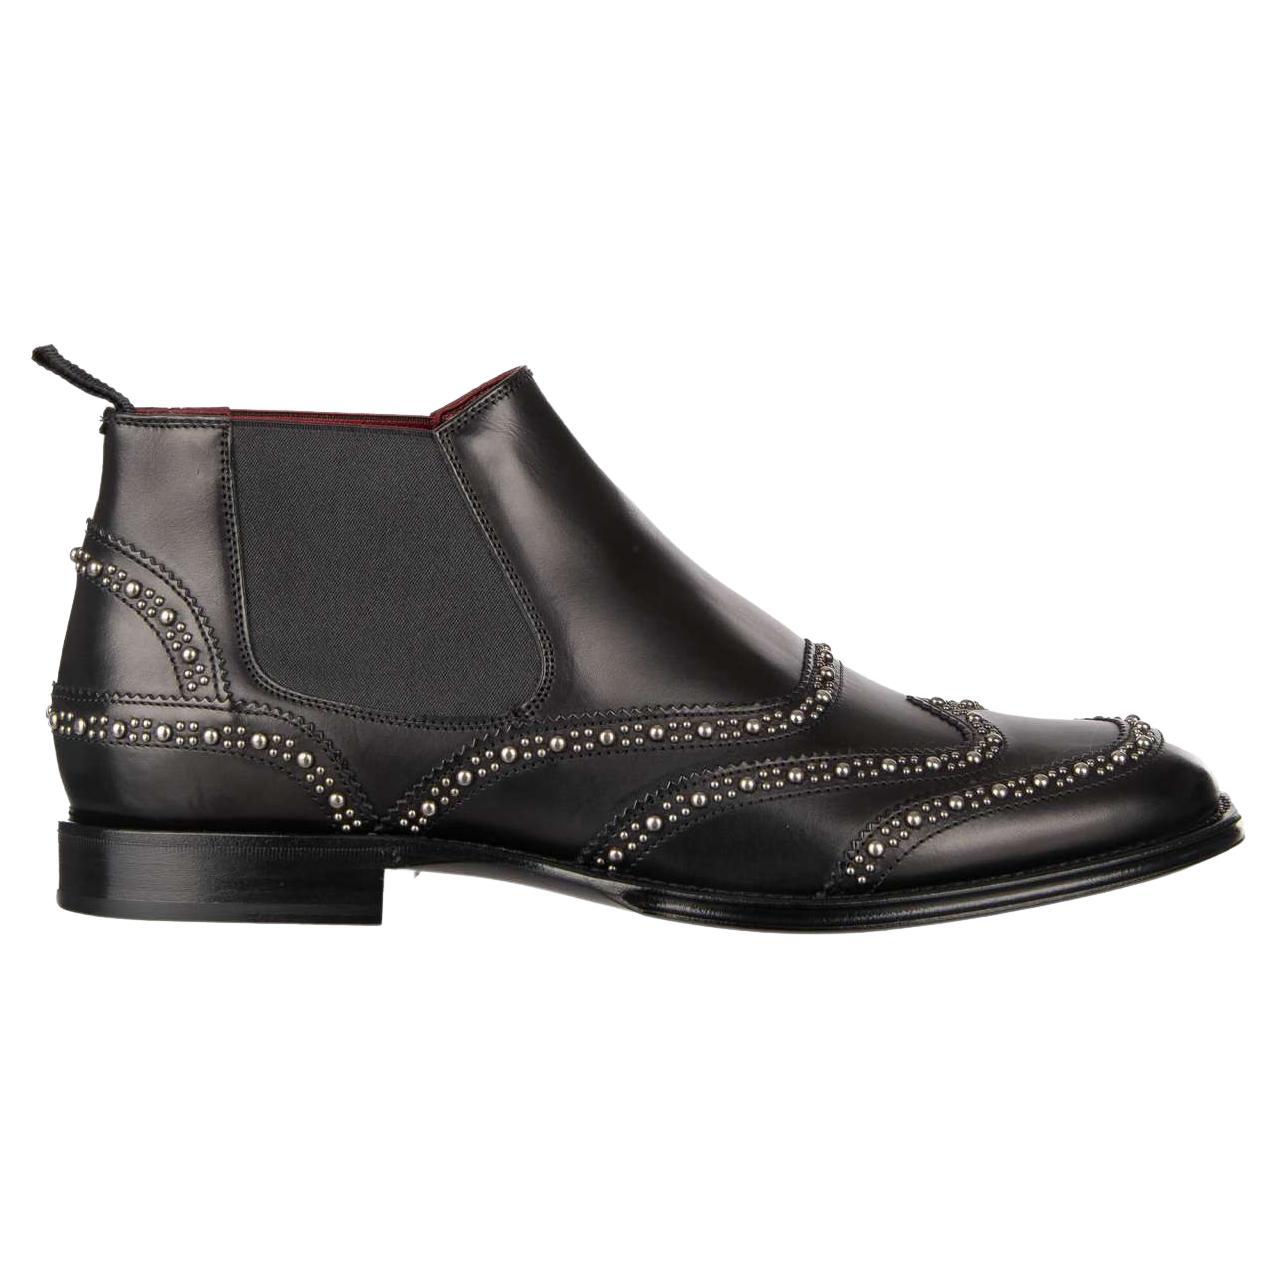 Dolce & Gabbana Studded Leather Ankle Boots Shoes MARSALA Black EUR 41.5 For Sale